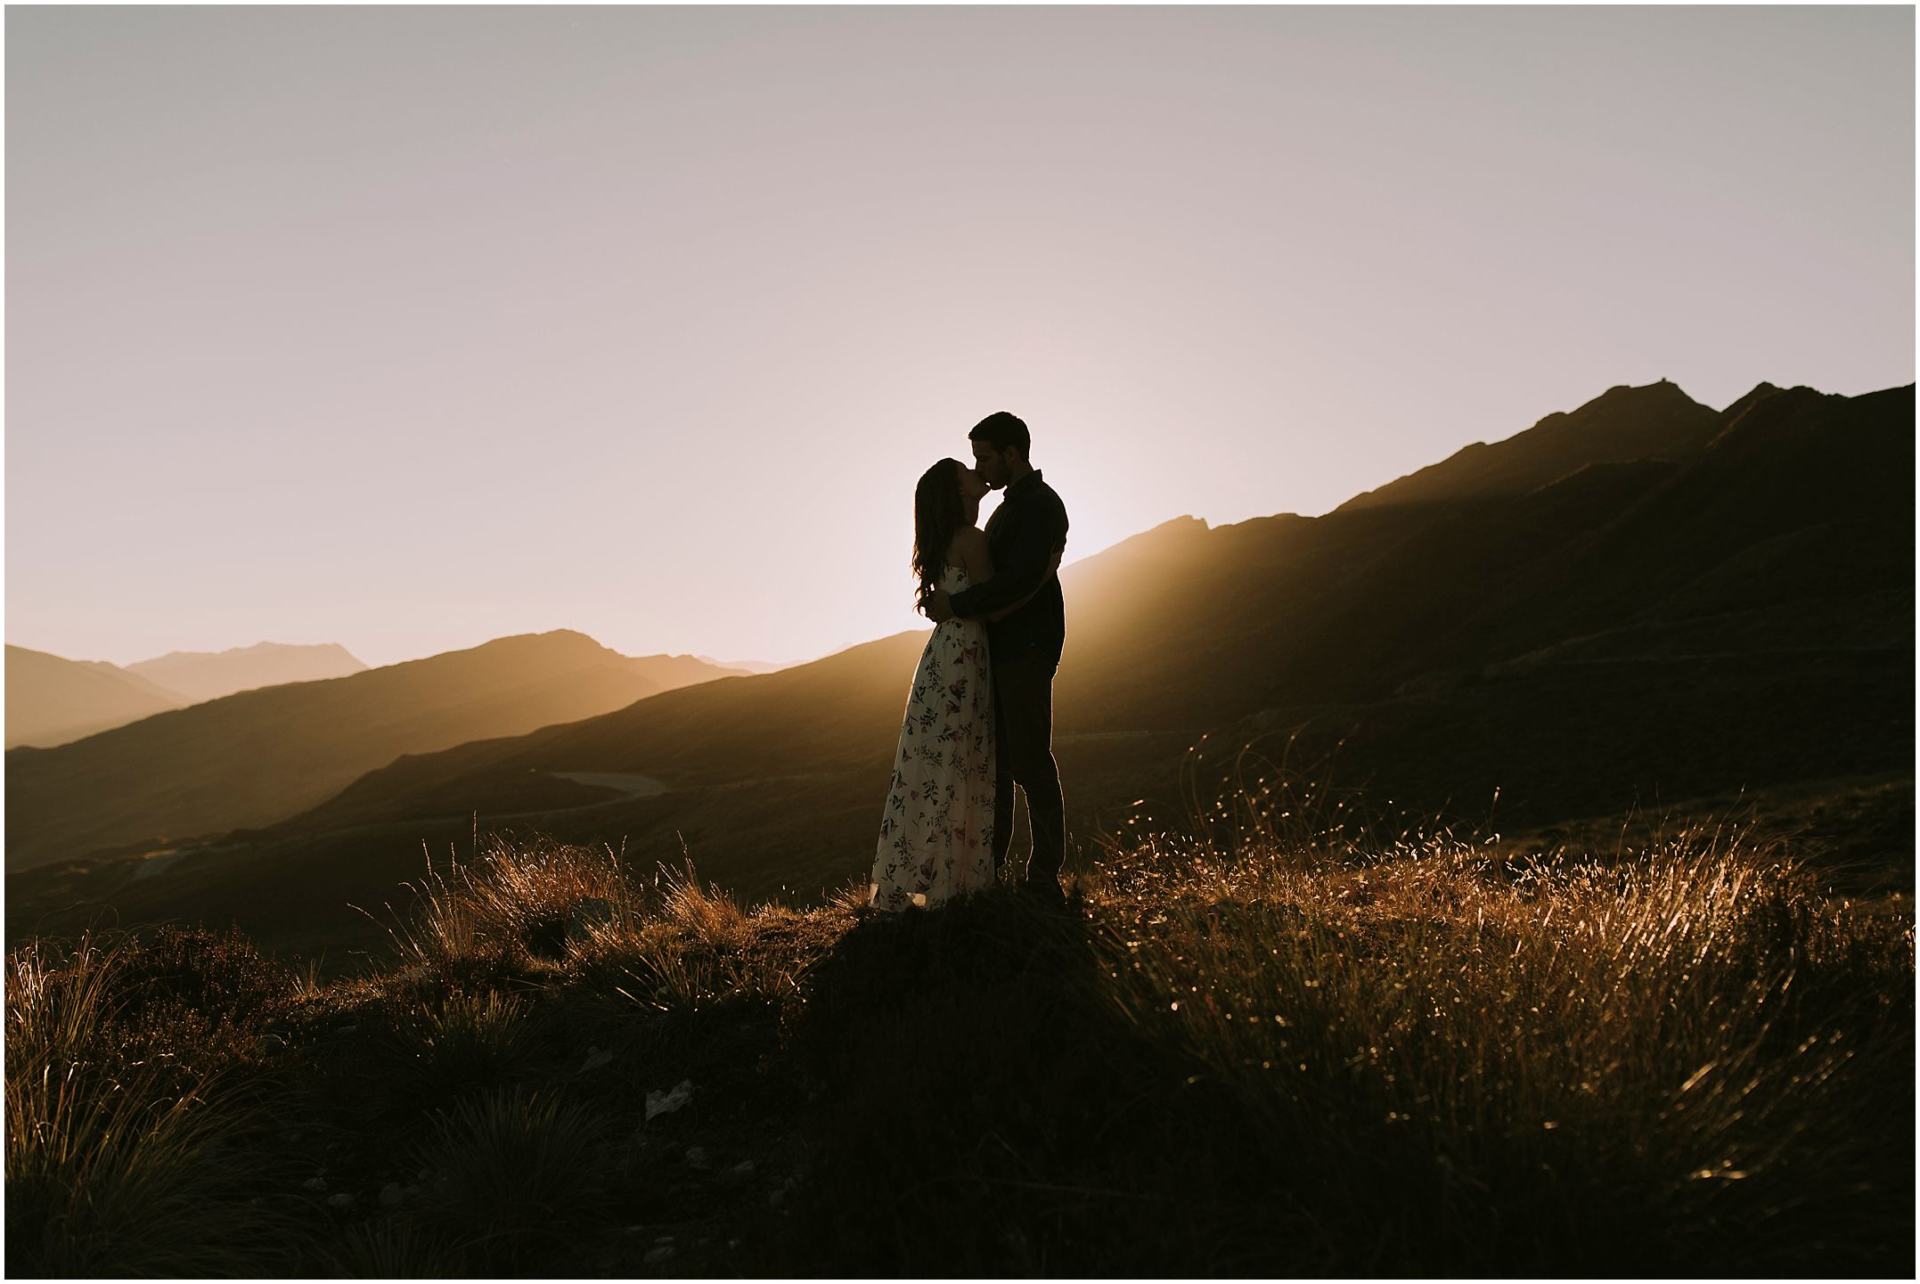 Charlotte Kiri Photography - Engagement Photography with an admiring couple standing on a clifftop in silhouette, with the sun setting behind the mountains in the distance in Wanaka, New Zealand